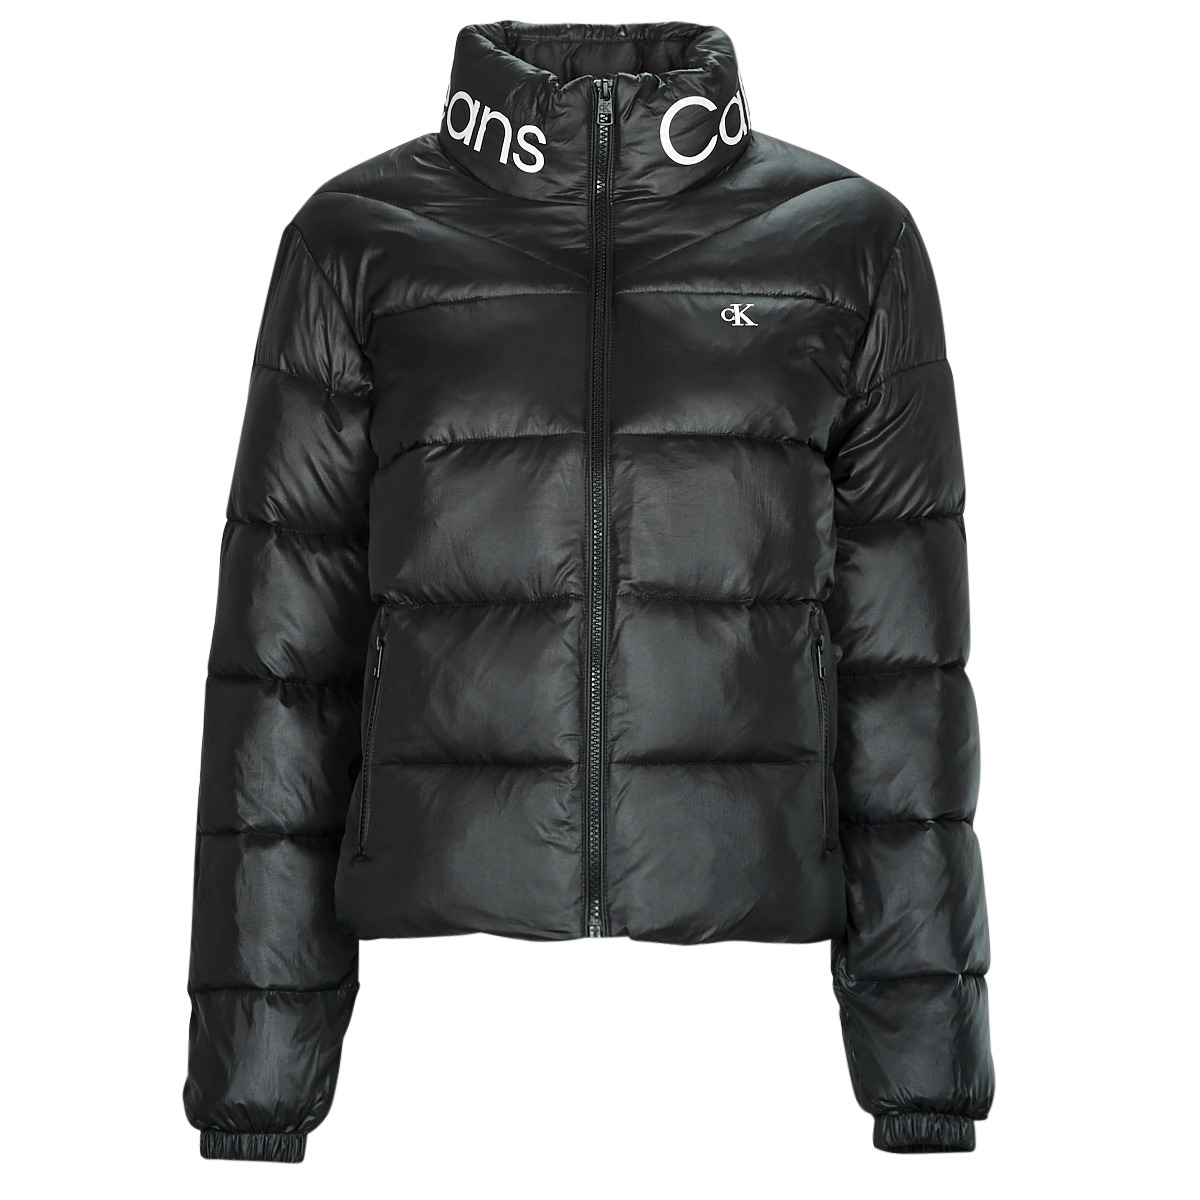 Calvin Klein PADDED coats delivery FITTED Spartoo Jeans ! Black JACKET Duffel Women | LW Clothing - Free - NET